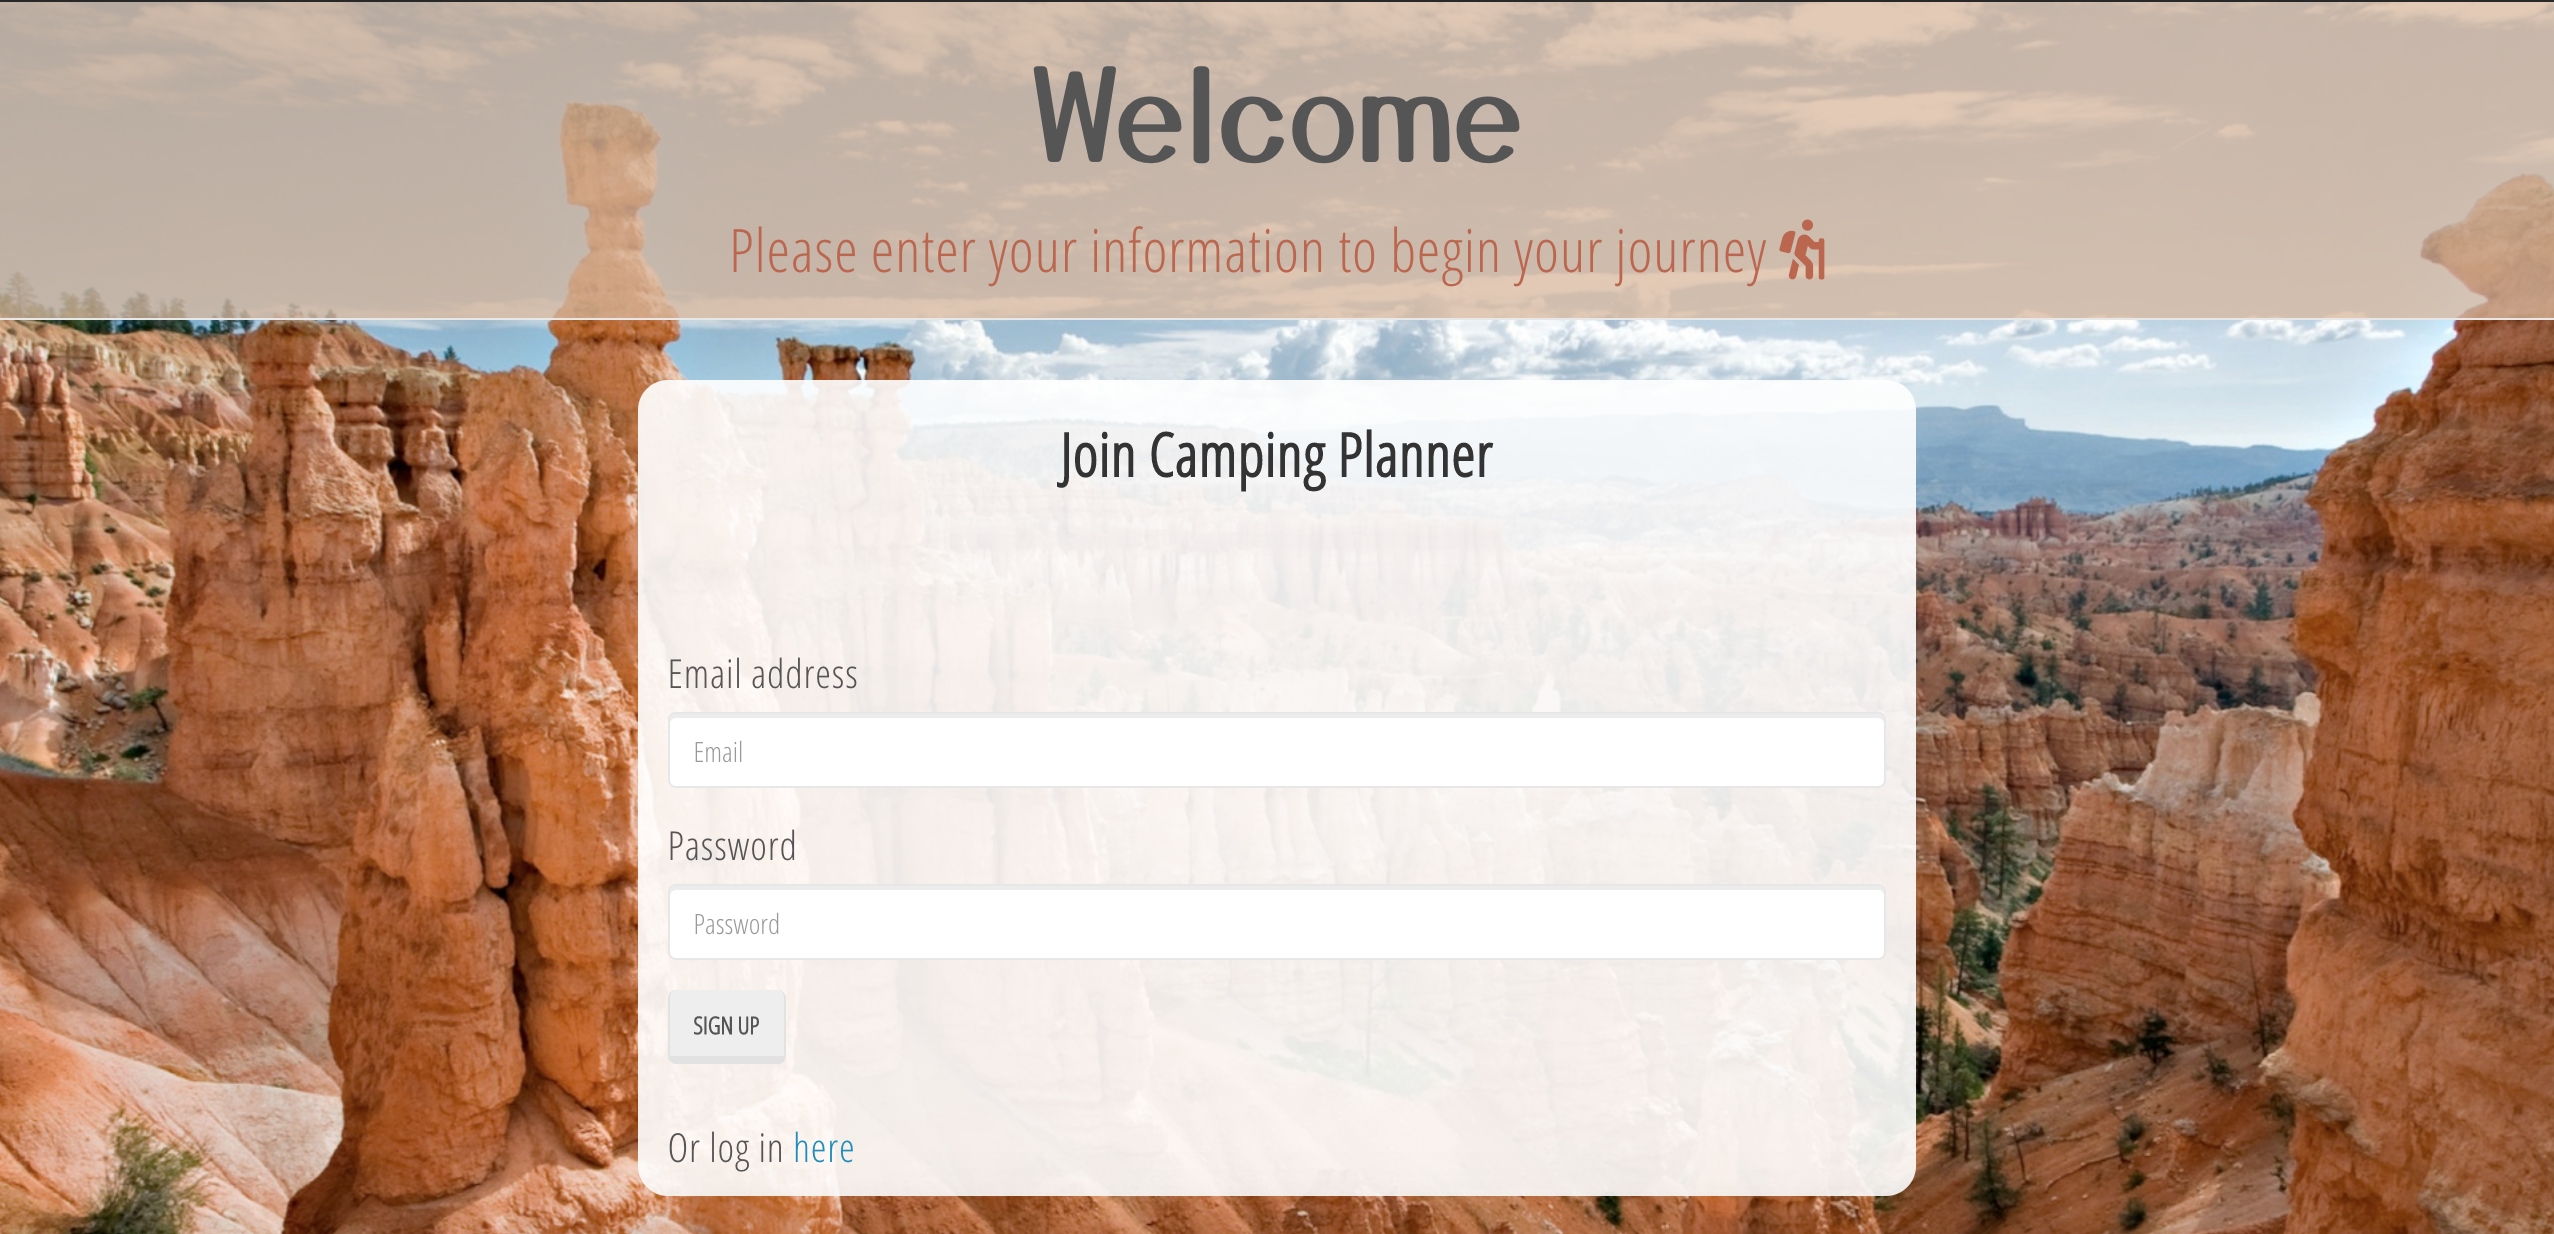 Camping Planner Welcome